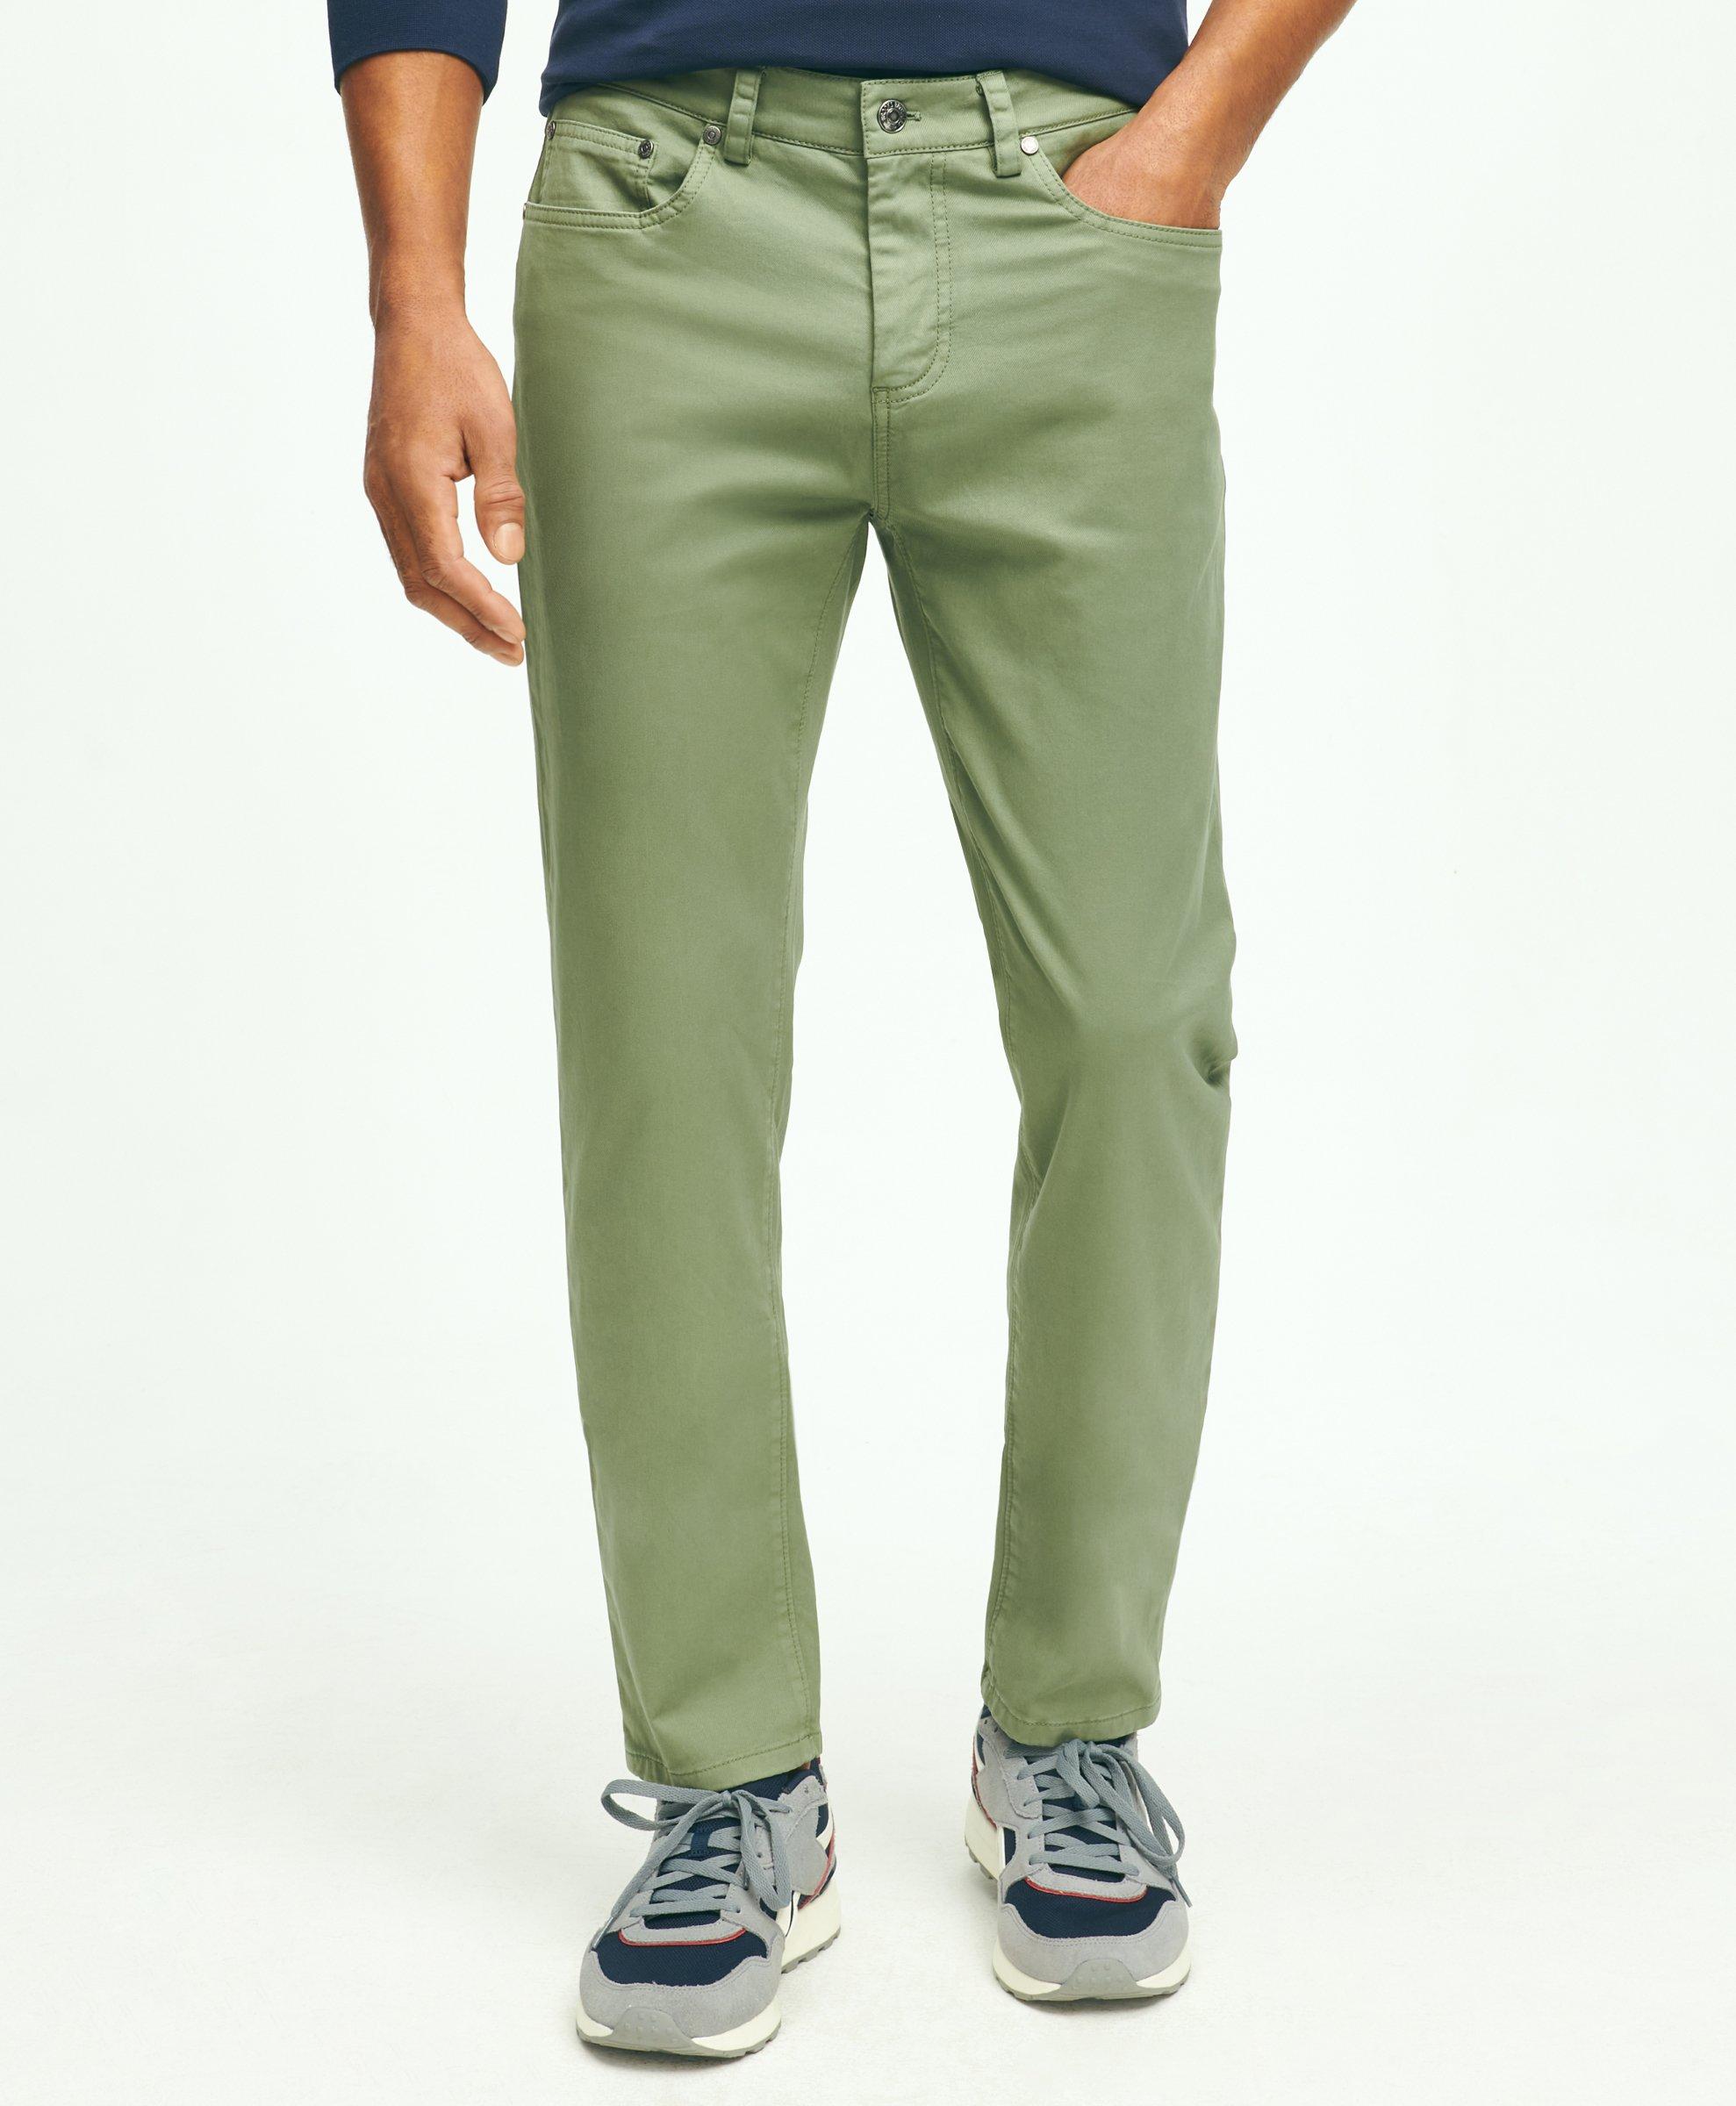 Brooks Brothers Slim Fit Five-pocket Stretch Cotton Garment Dyed Pants | Green | Size 30 30